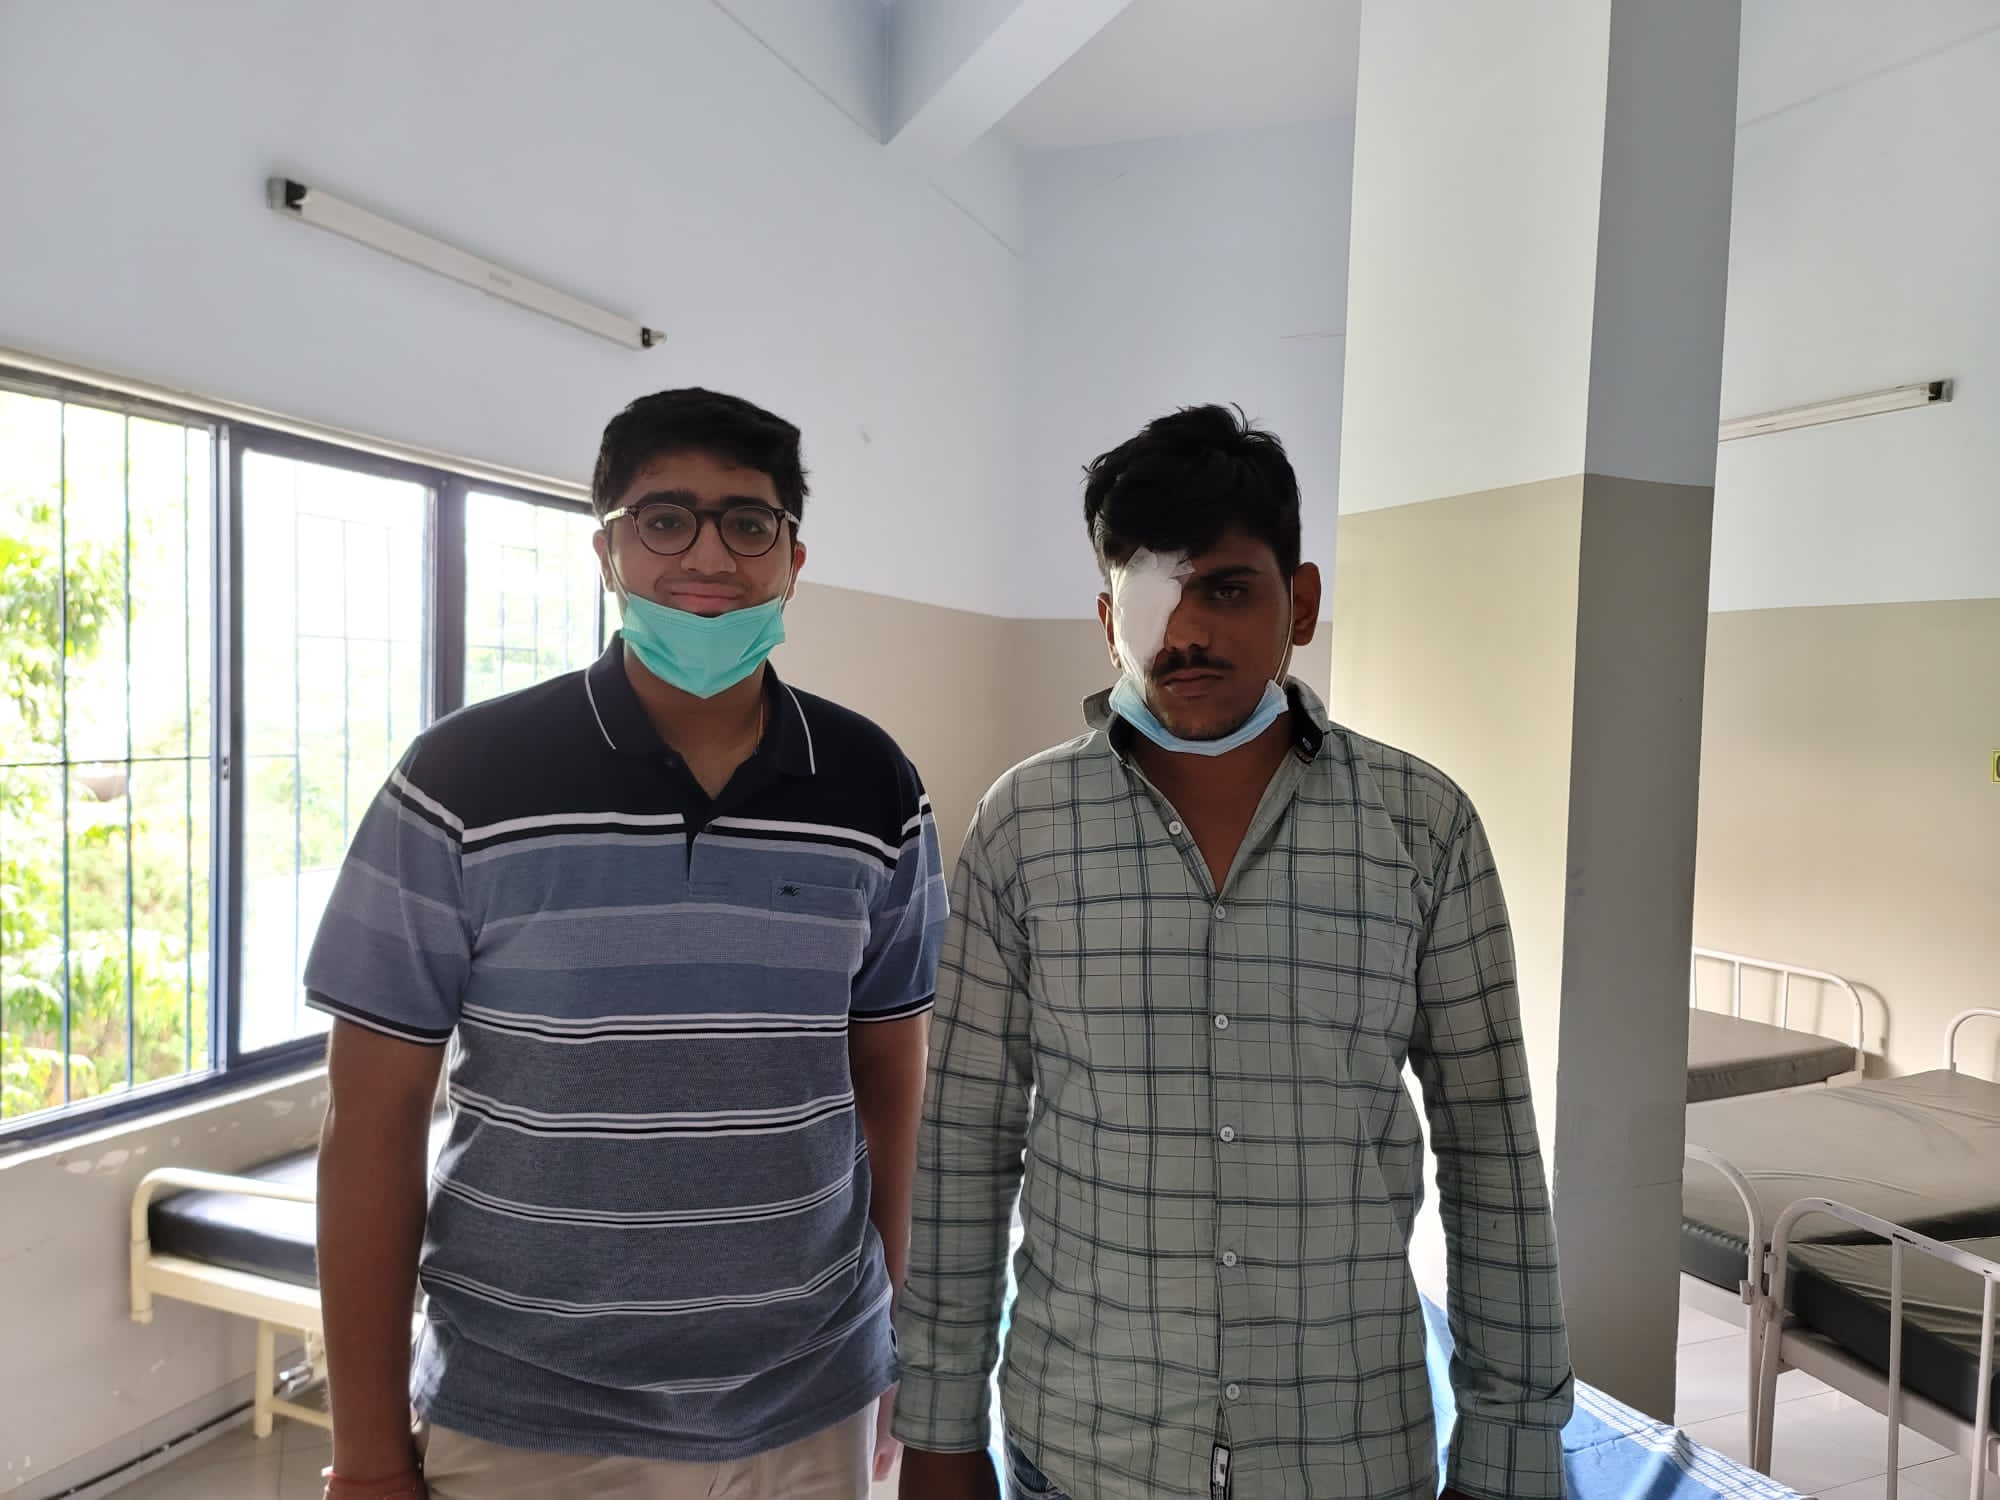 Keratoconus eye surgery was successful for Mr. Abhishek Gowda at VIIO Bangalore under the helping hands and support of Onepaircharity!